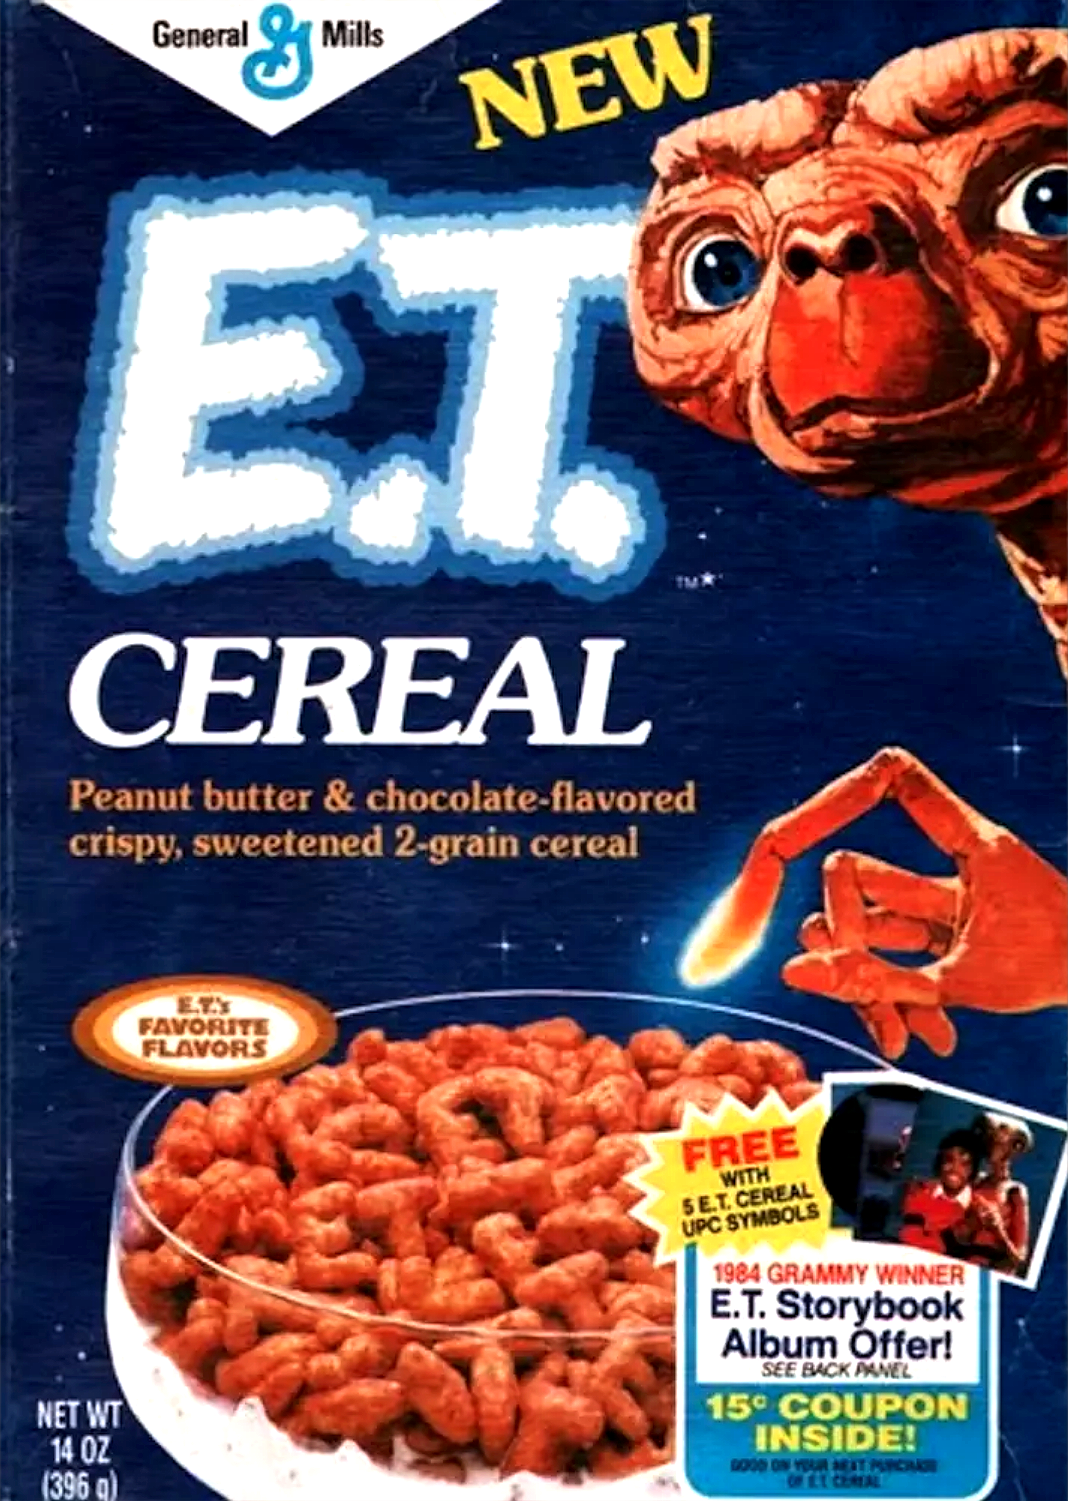 Cereal Box Prizes from the 1970s and 1980s Breakfast Foods Council